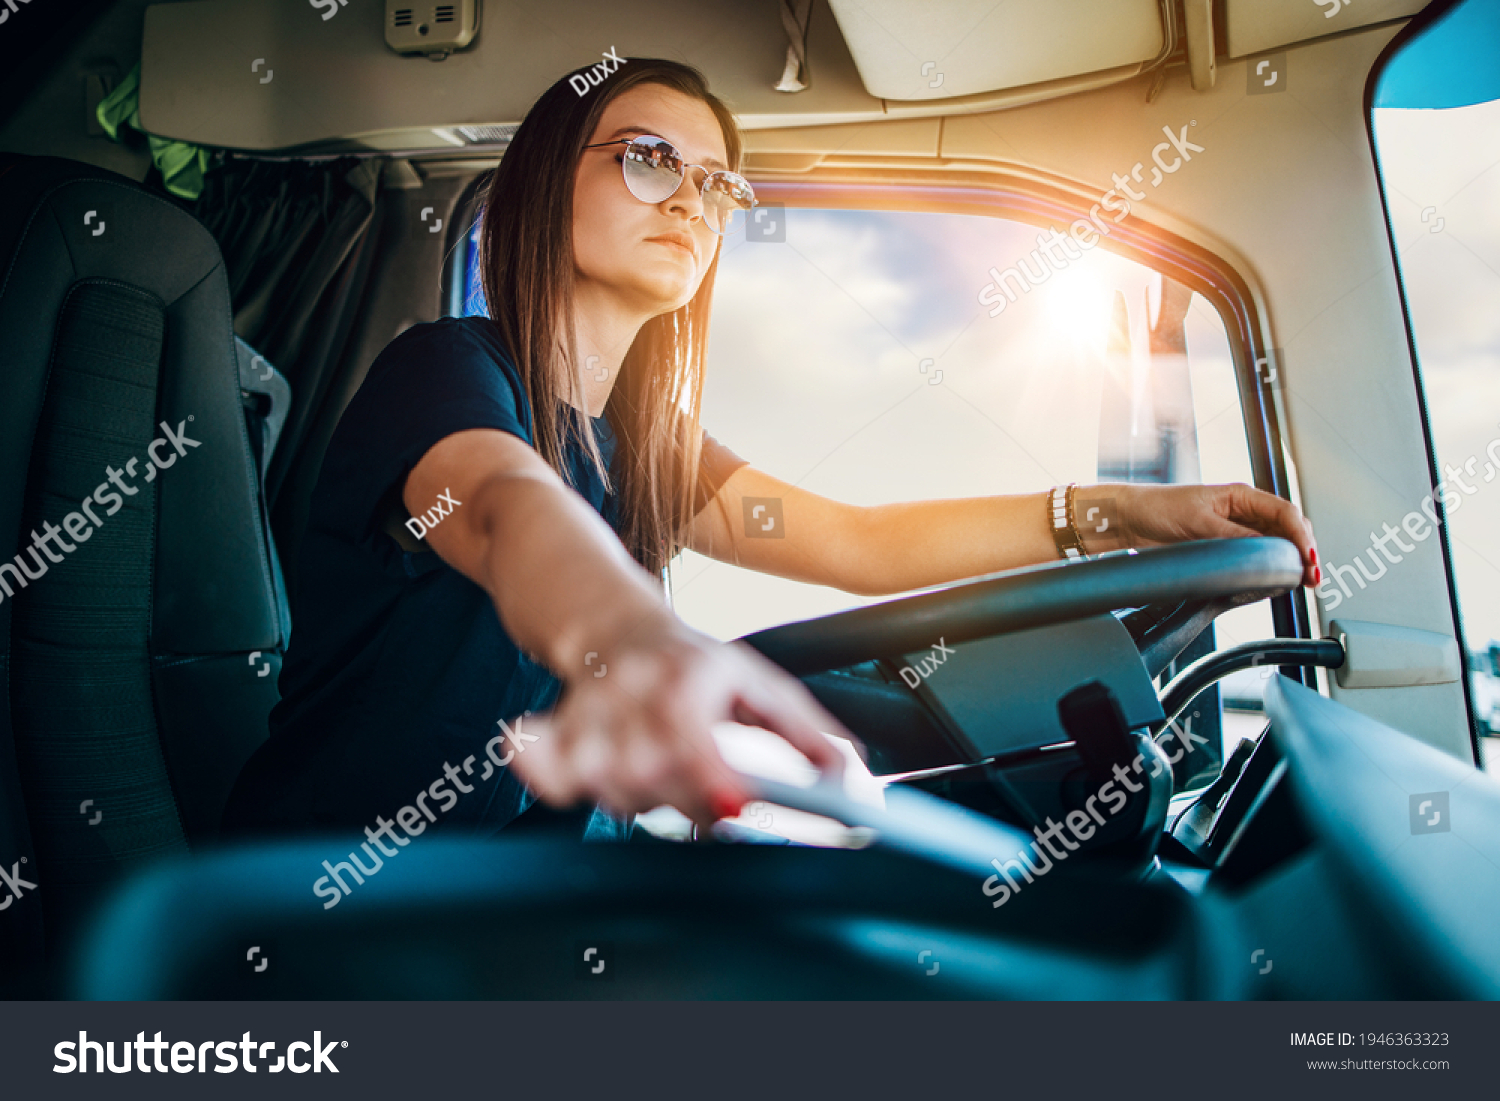 Portrait of beautiful young woman professional truck driver sitting and driving big truck. She is dangerously trying to take smart phone while driving. #1946363323